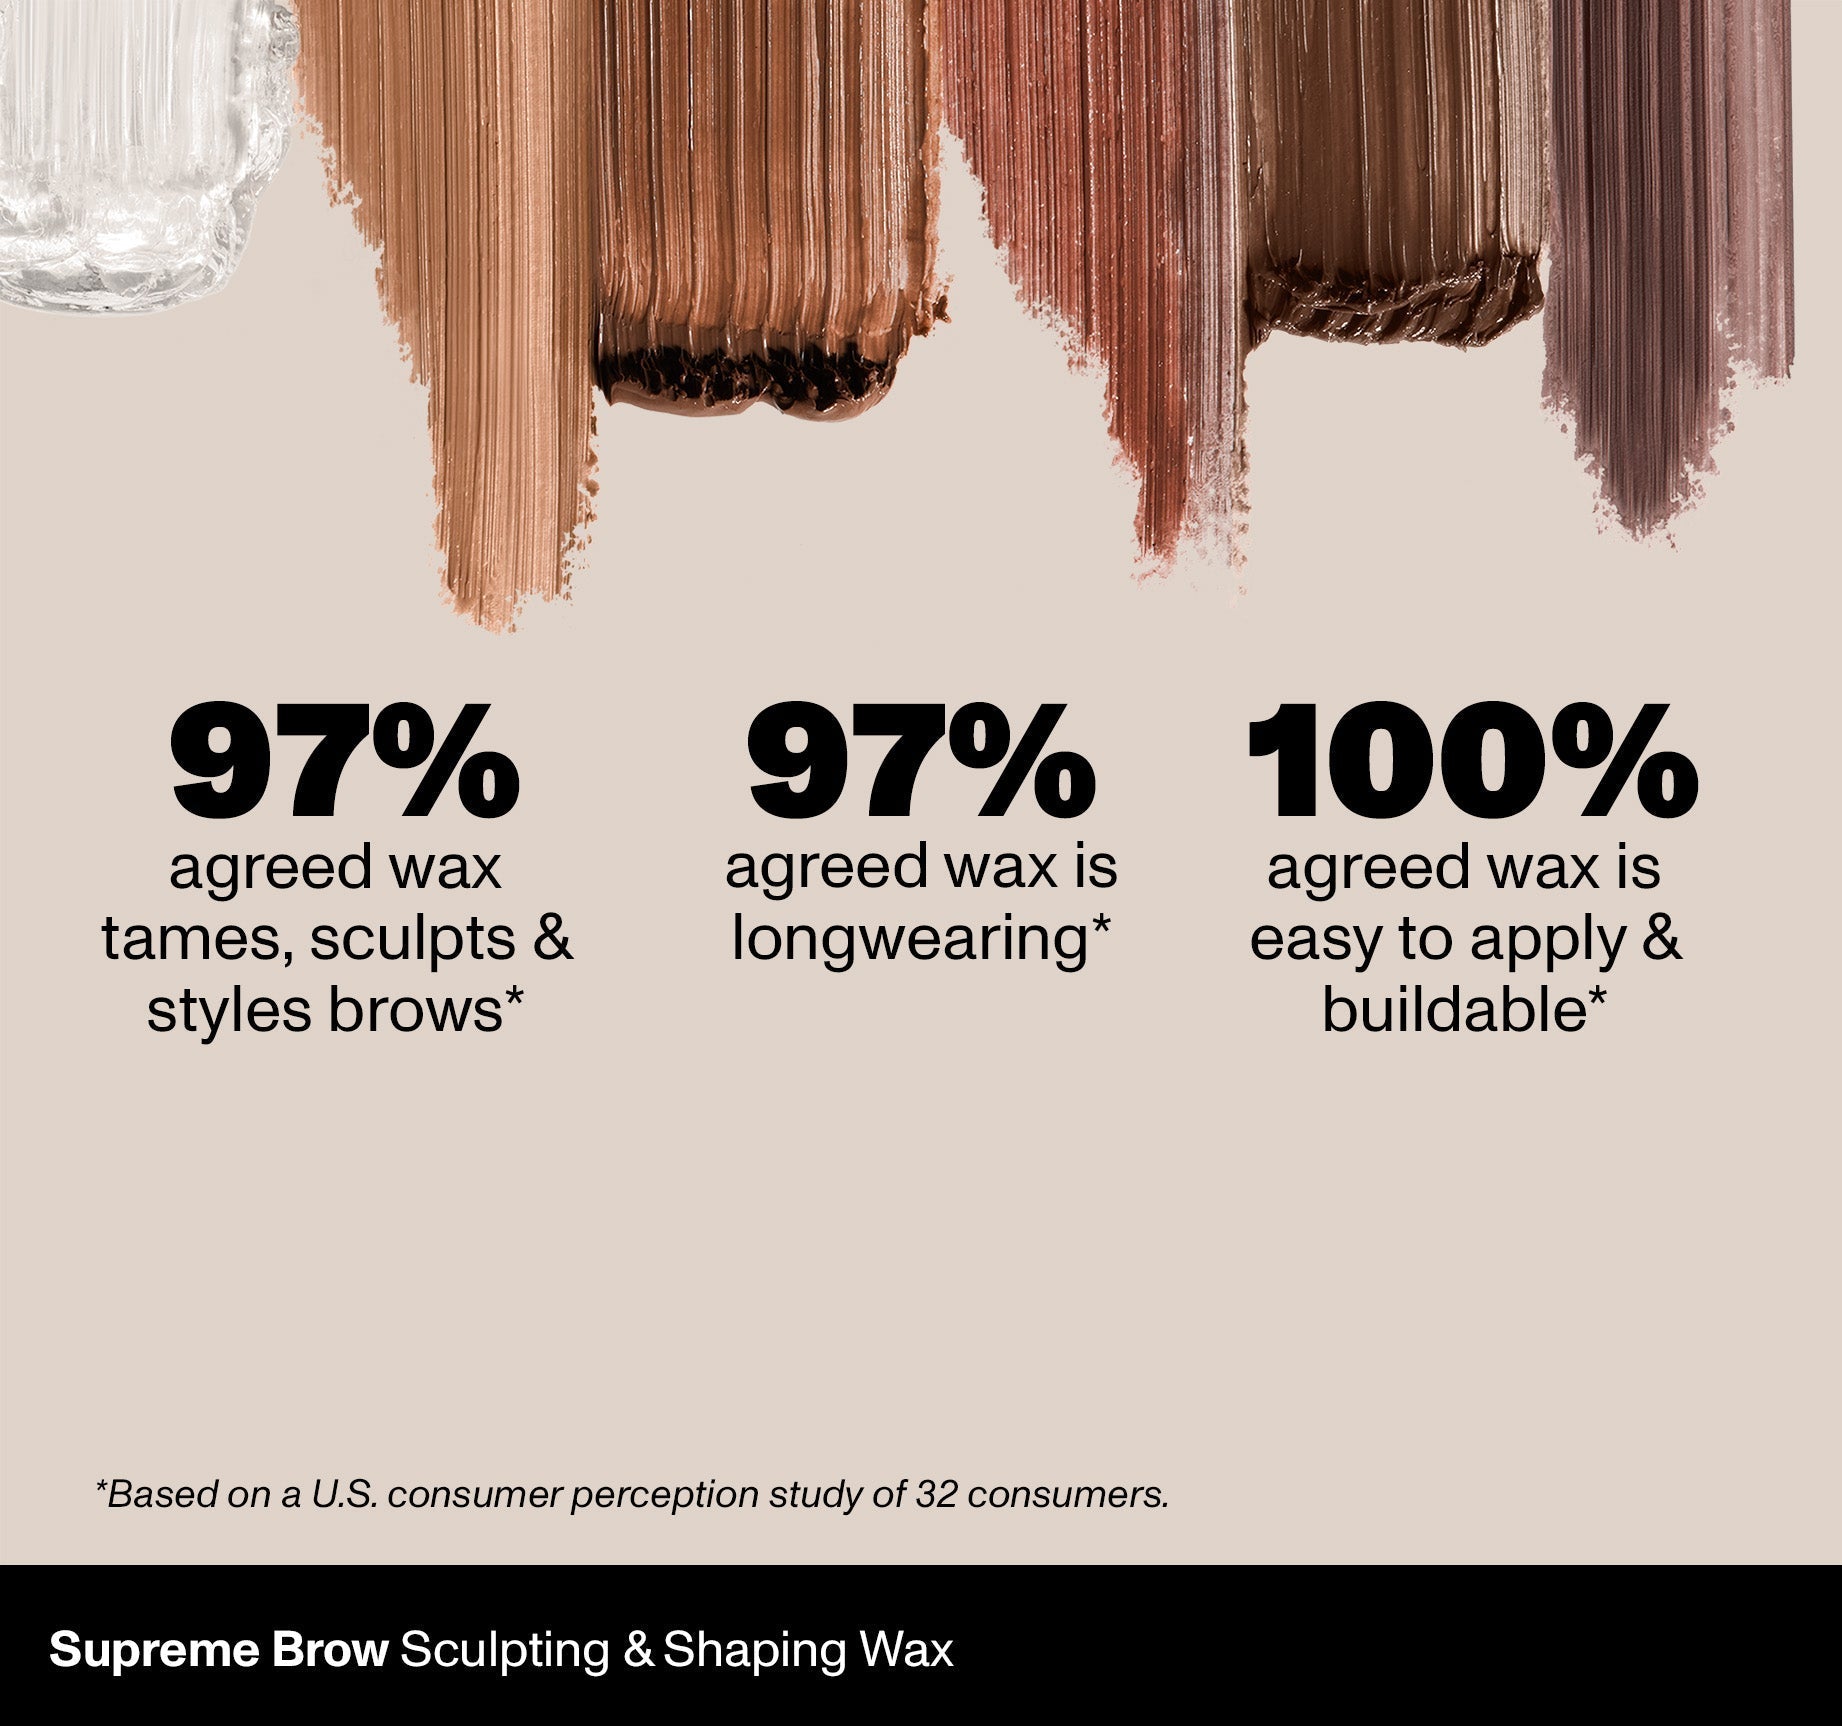 Supreme Brow Sculpting And Shaping Wax - Java - Image 5